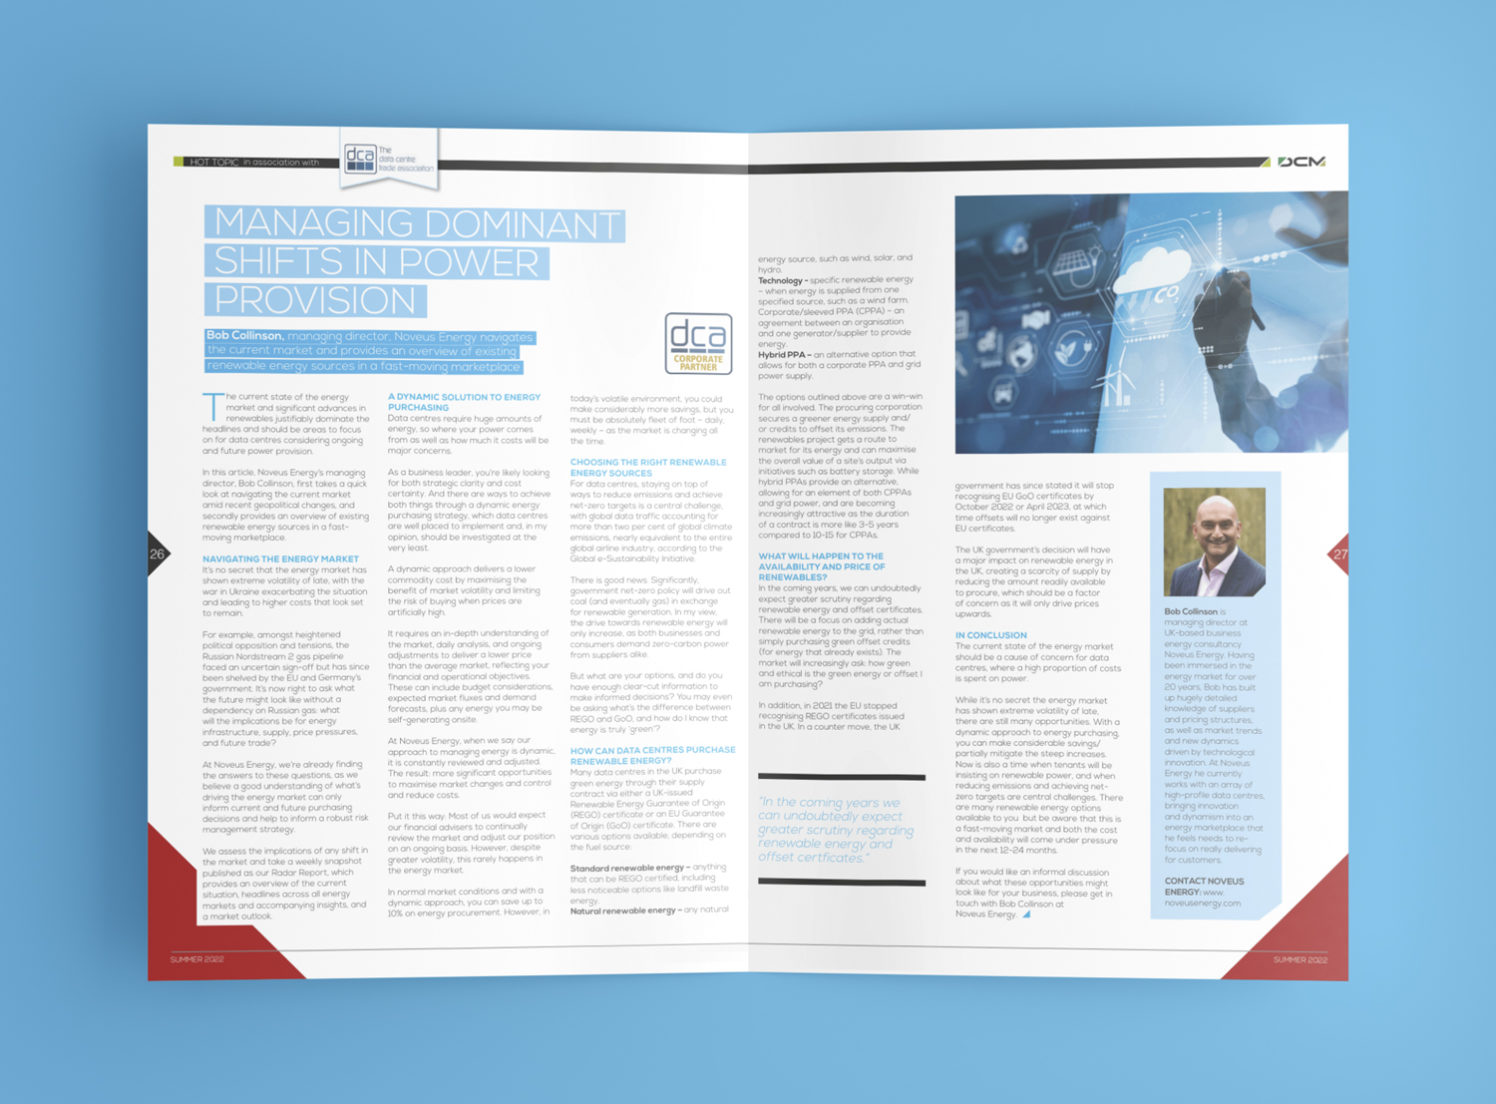 Noveus Energy's feature - Managing dominant shifts in power provision - is in the latest Data Centre Management's special edition on Managing the Power